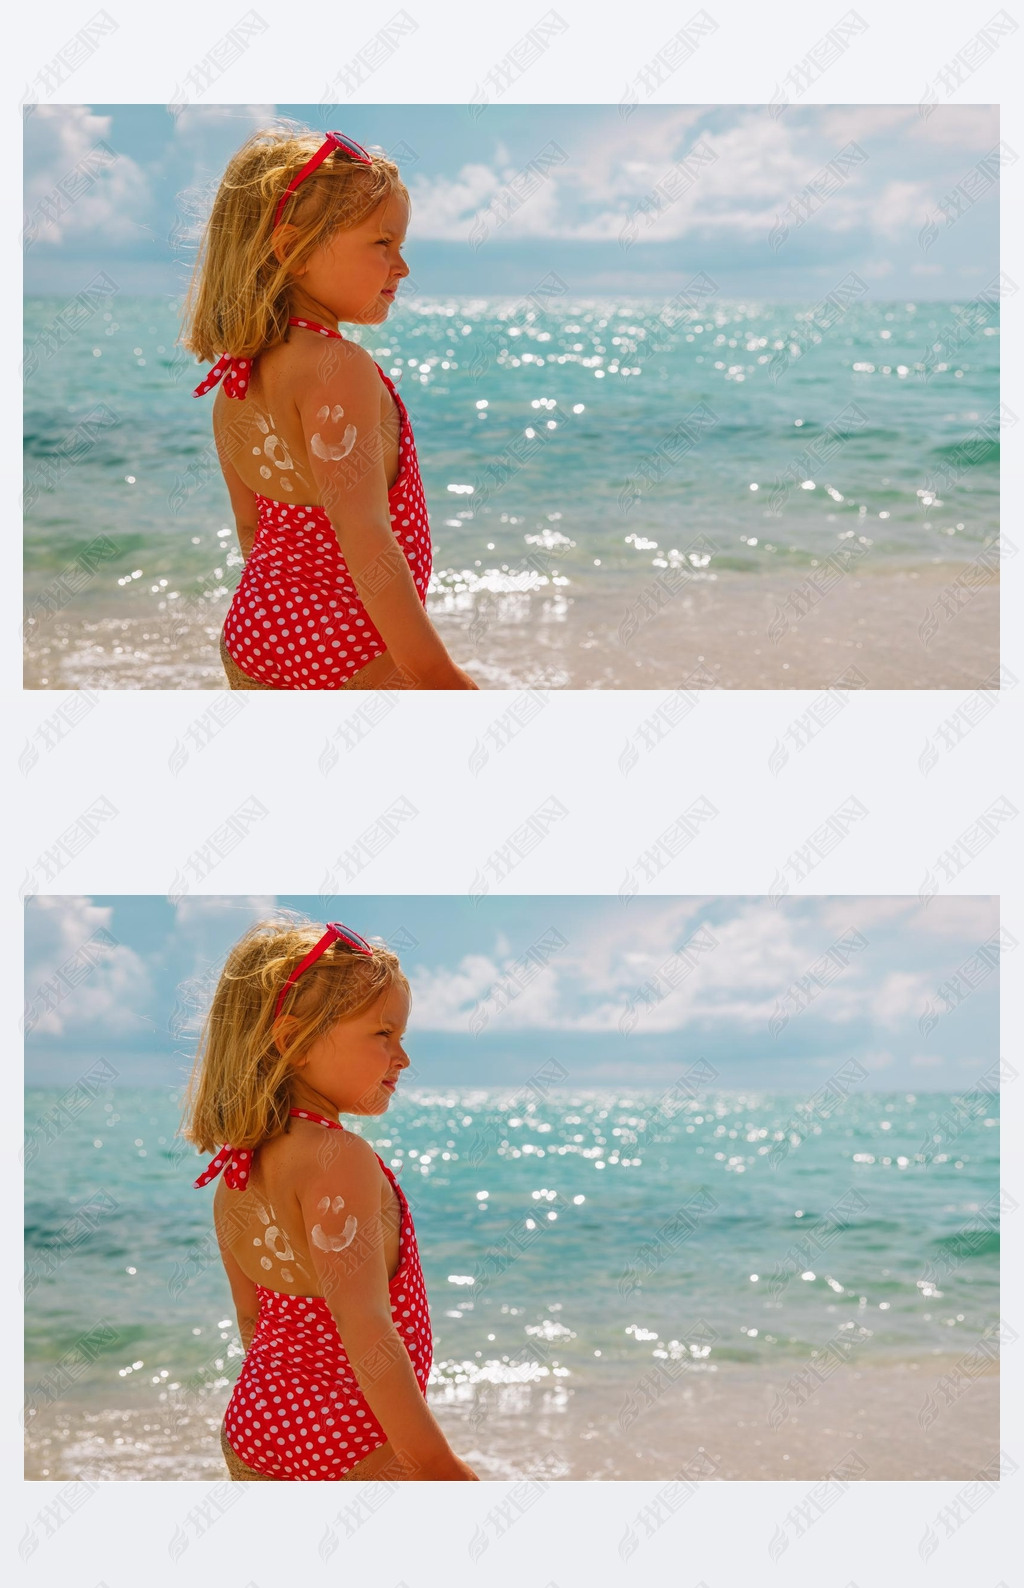 sun protection at beach- little girl with sunblock cream on shoulder